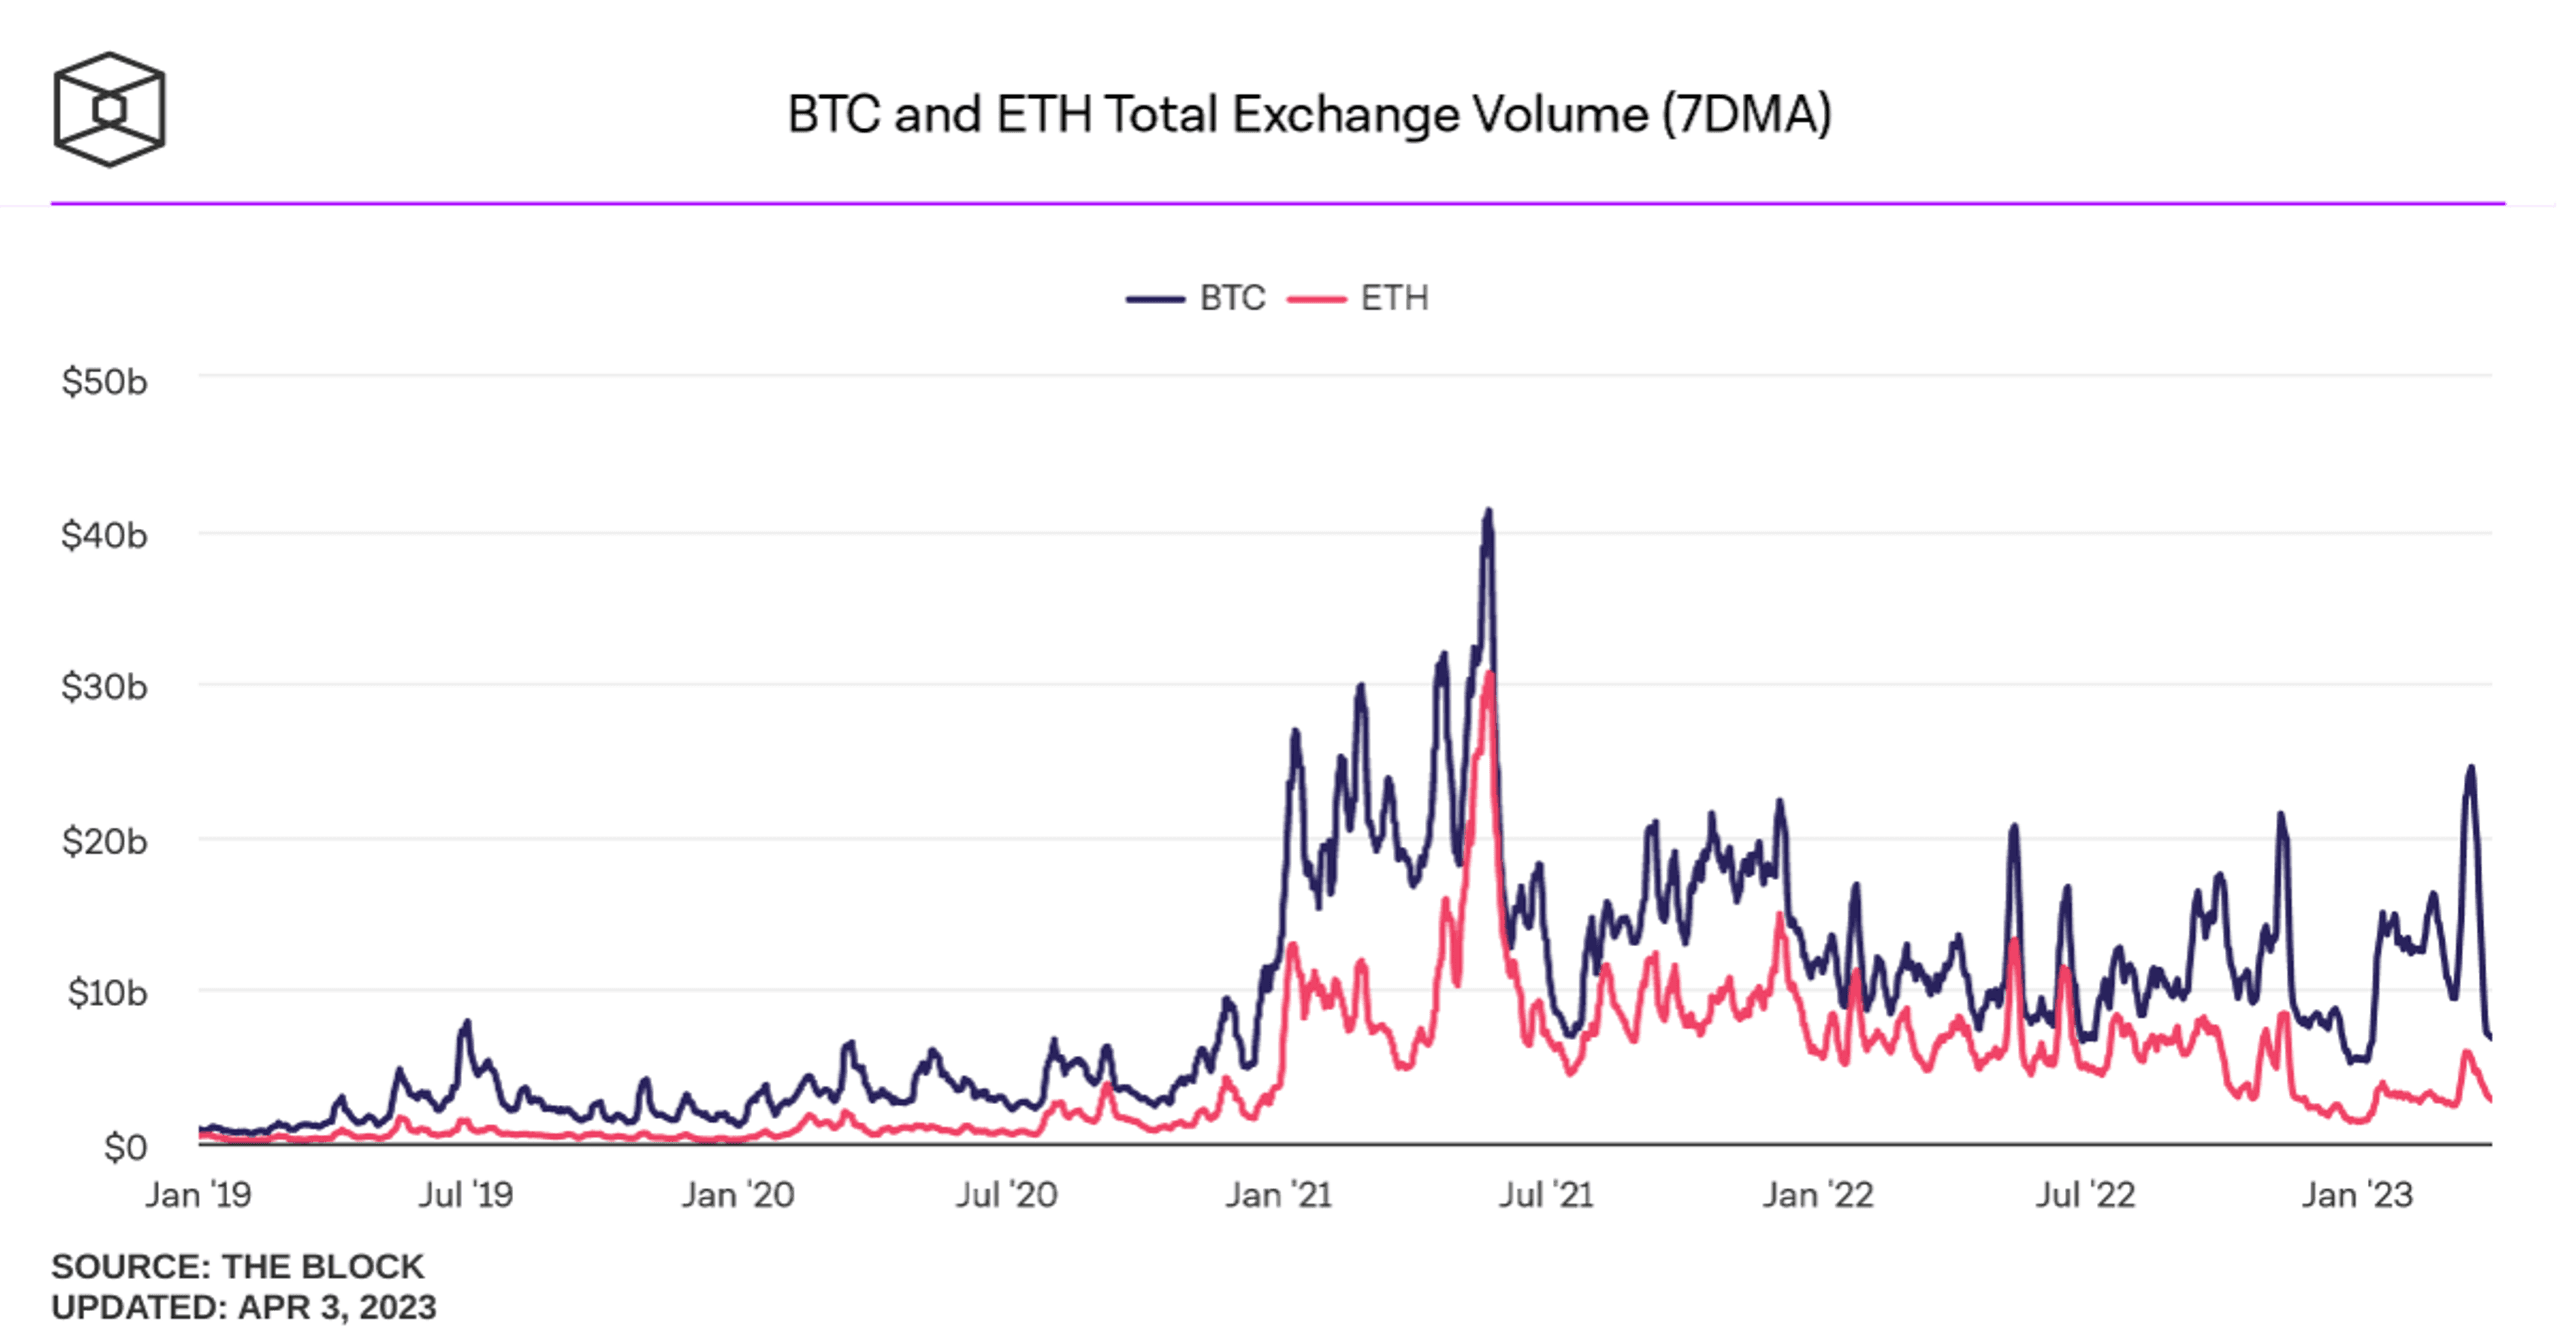 the total exchange volume of btc and eth